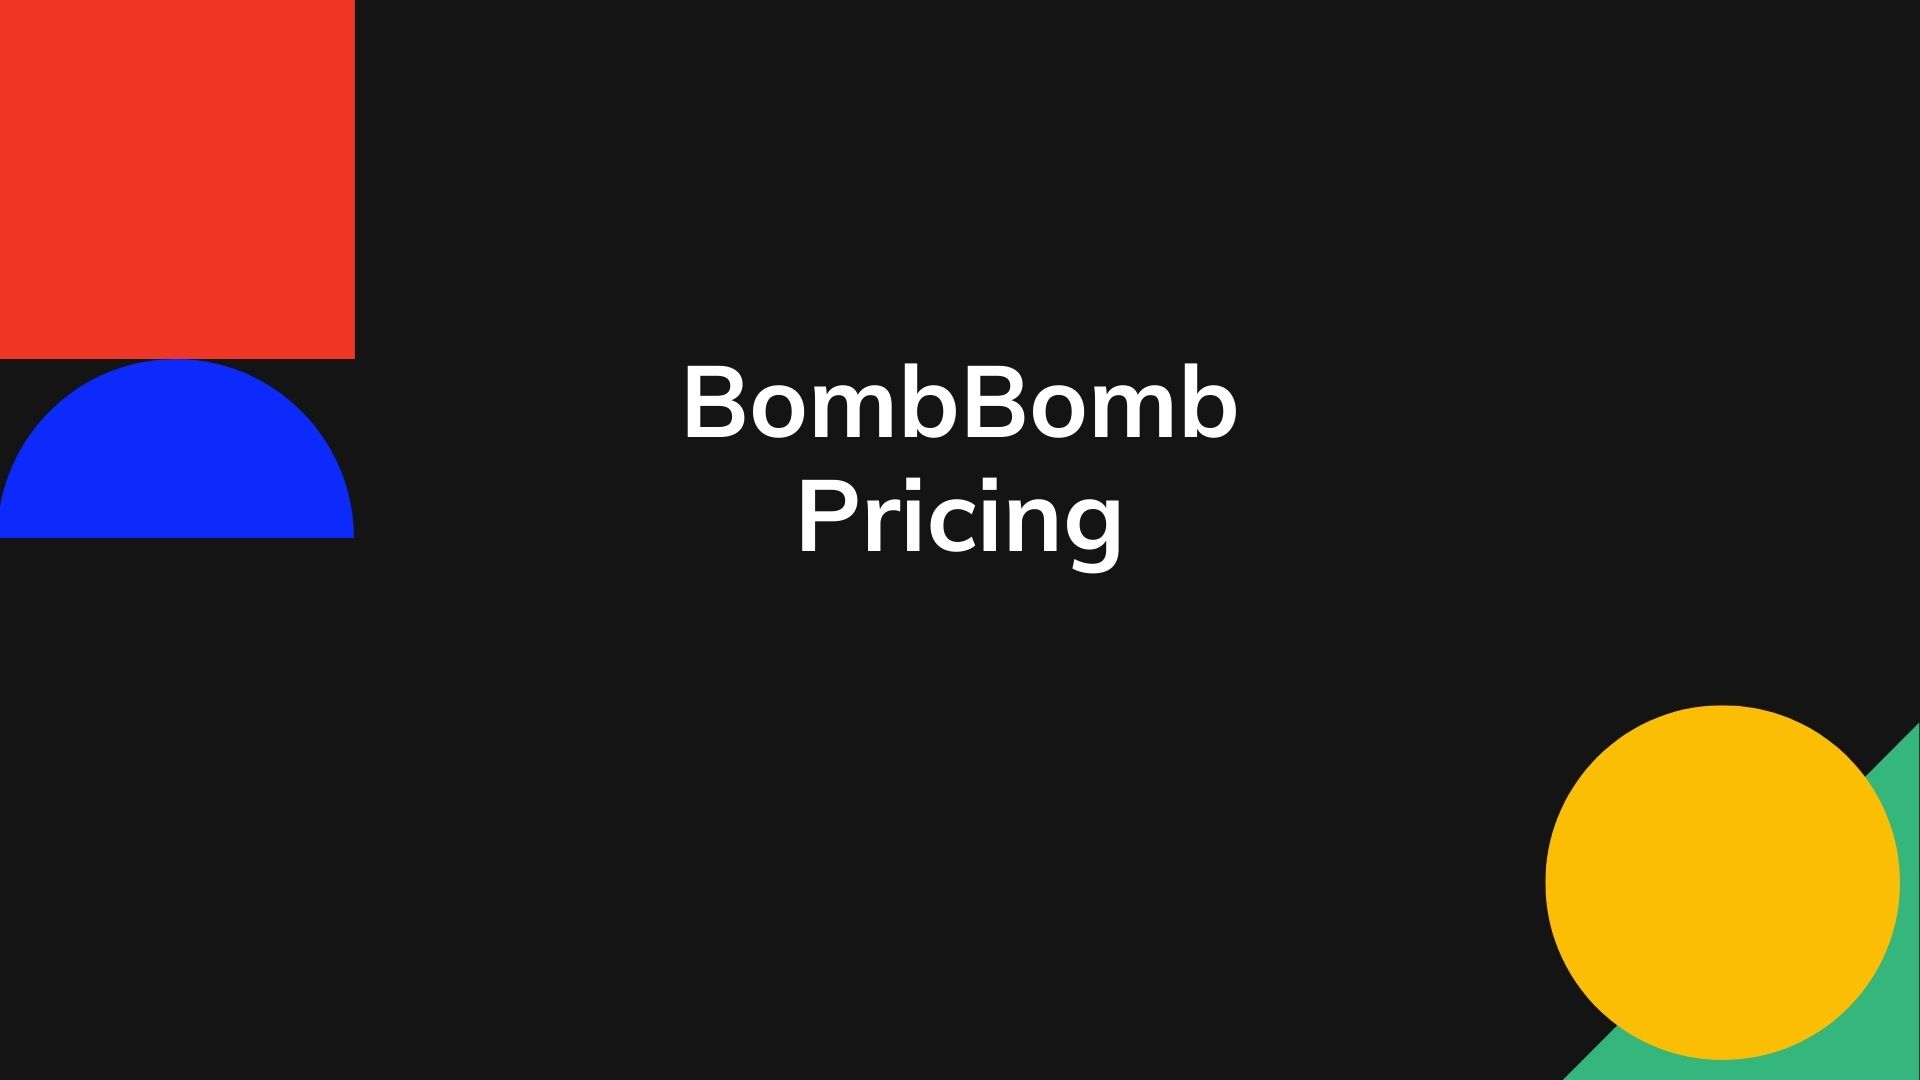 BombBomb Pricing – Actual Prices for All Plans, Enterprise Too